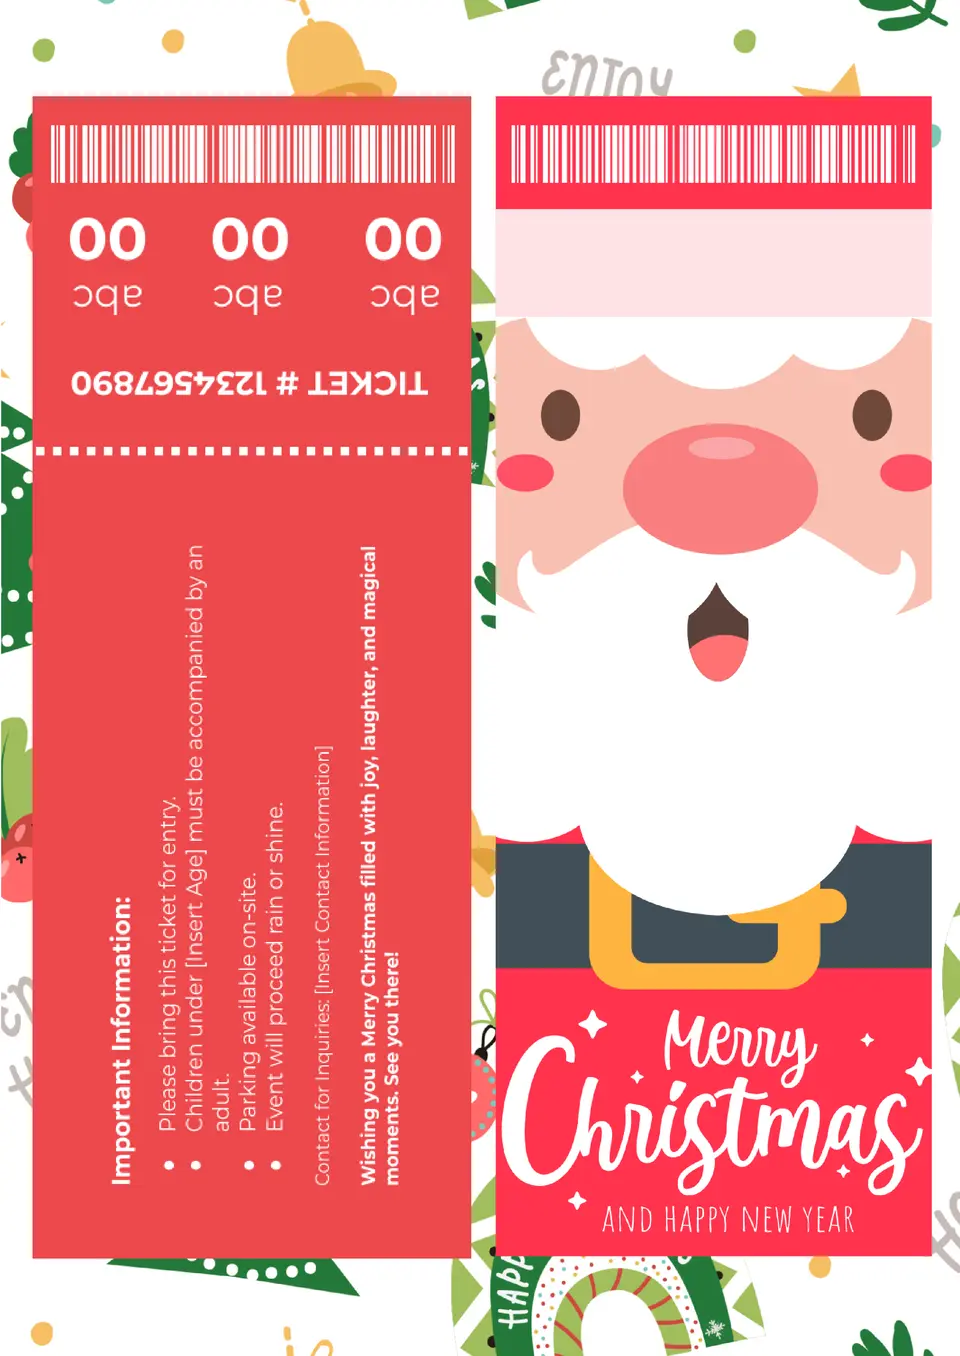 Christmas Ticket Template